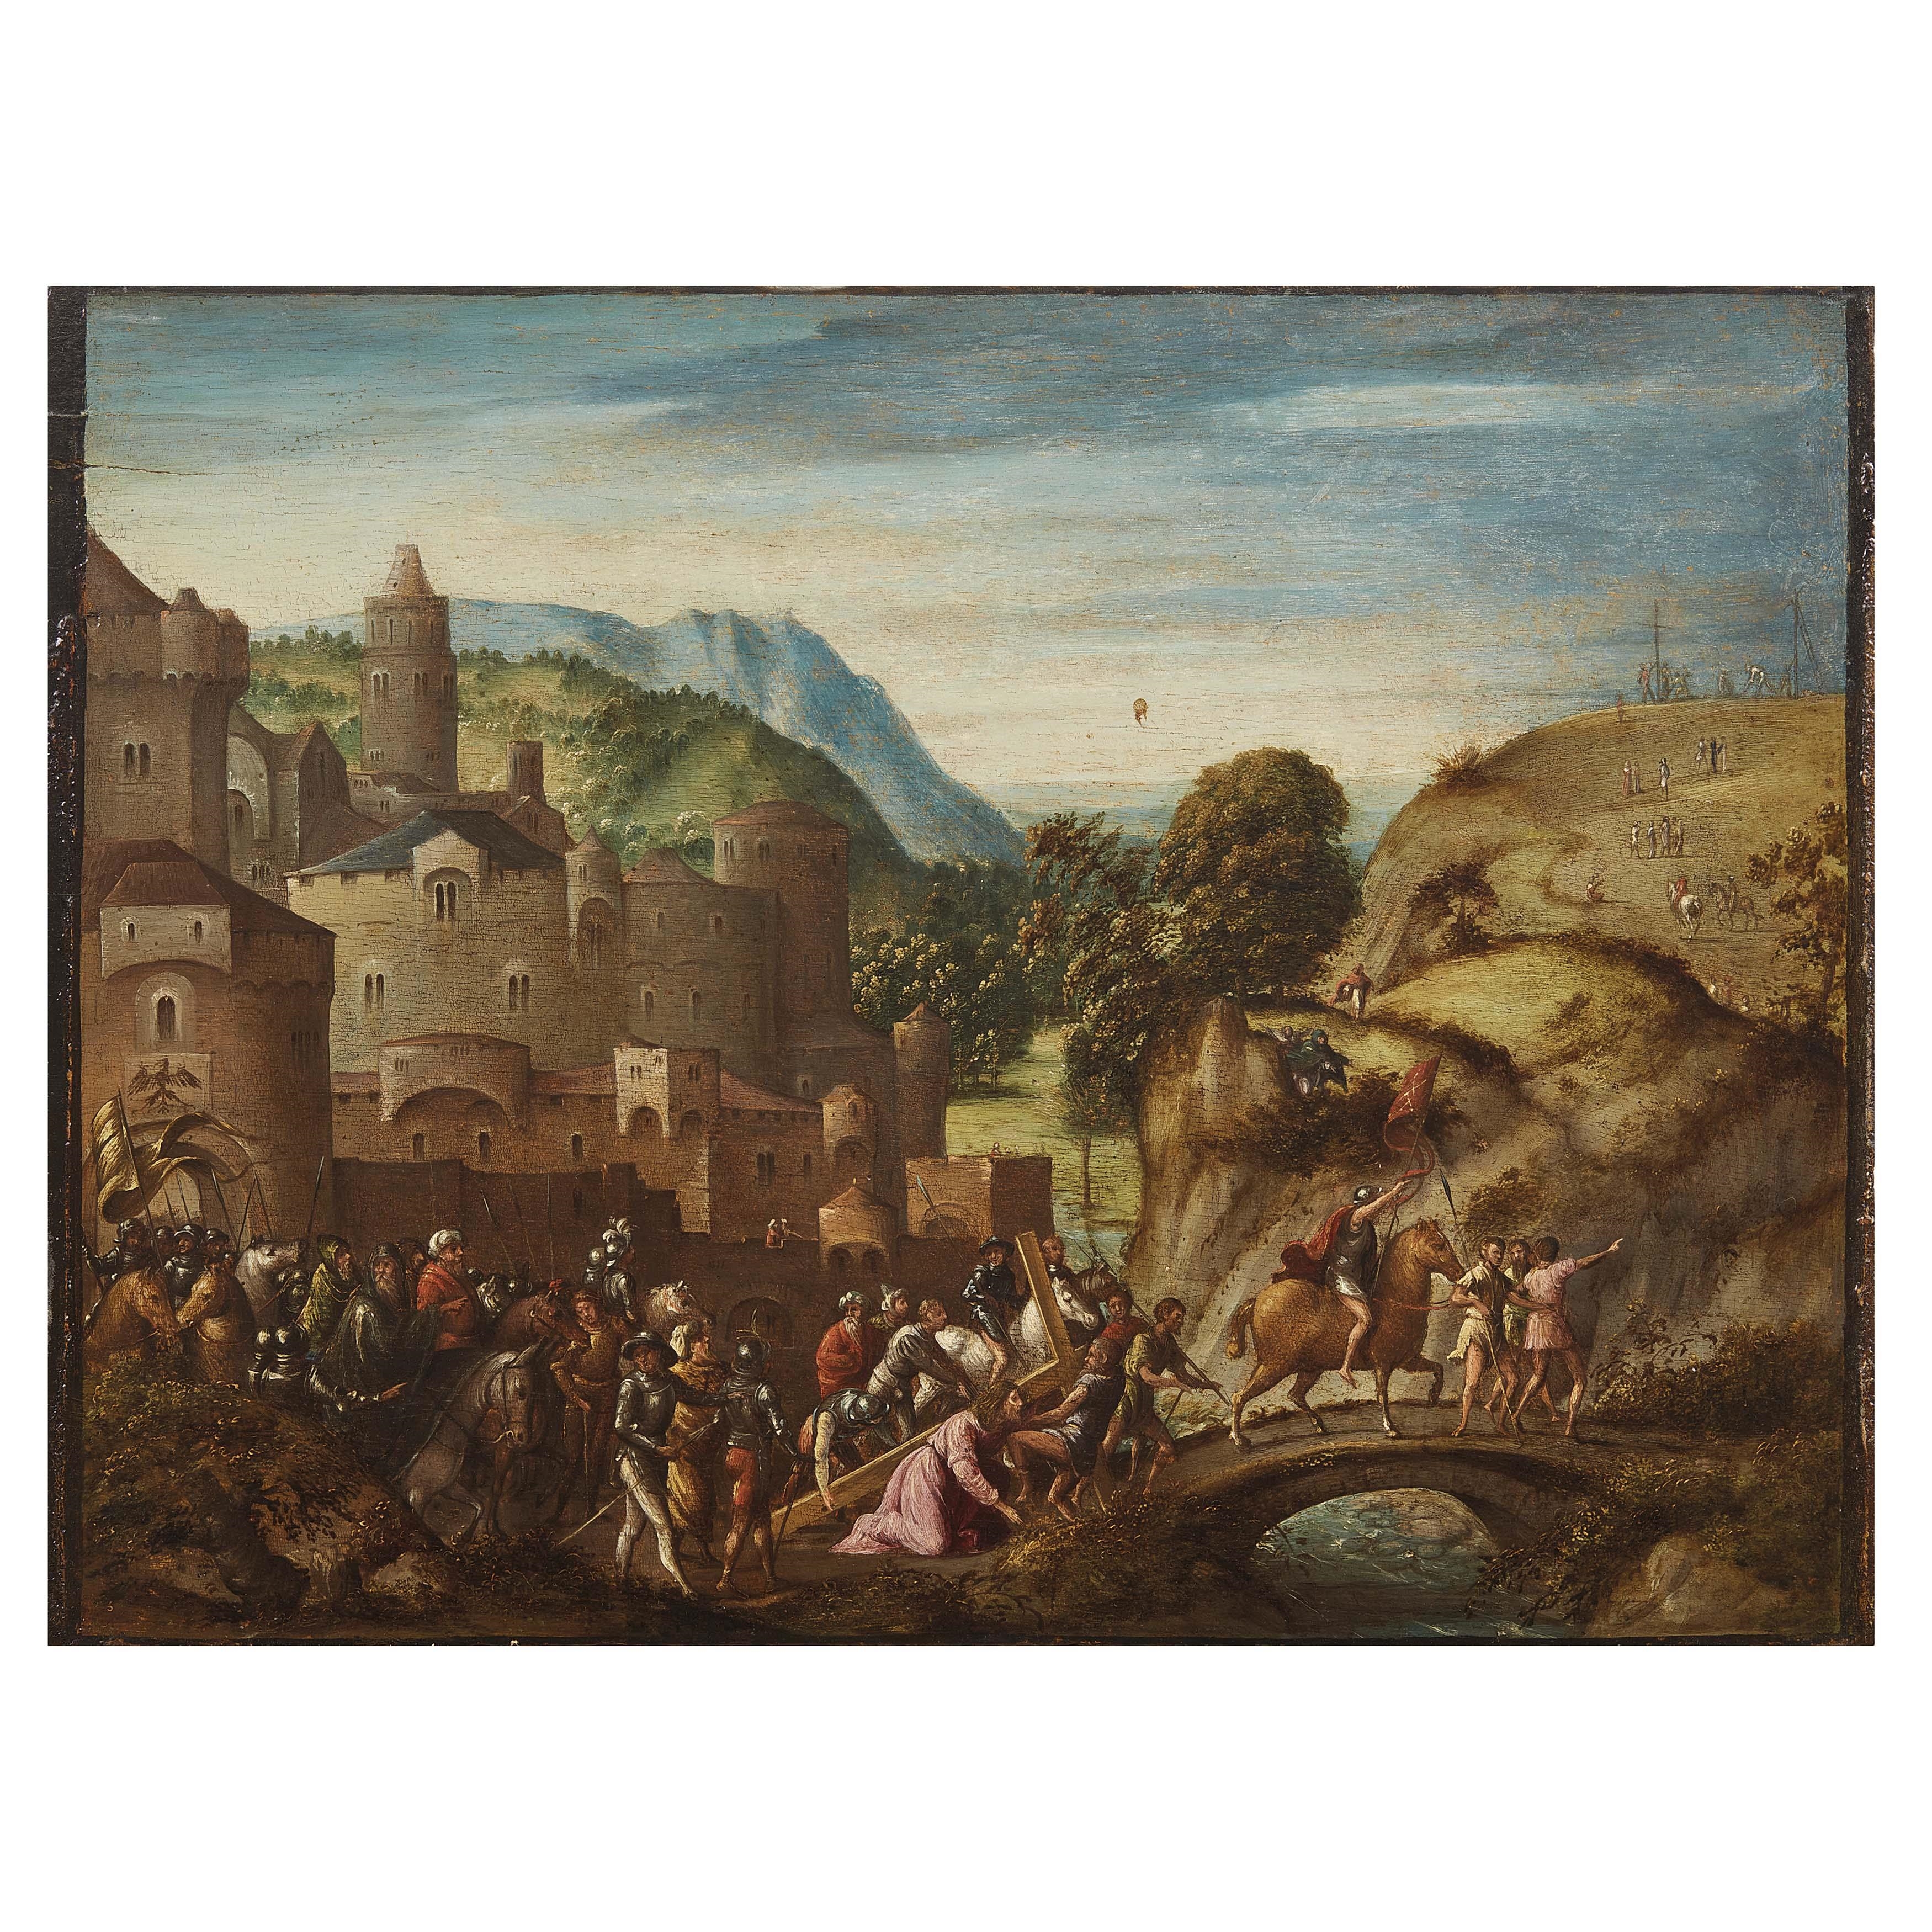 CHRIST ON THE ROAD TO CALVARY - Marcello Fogolino